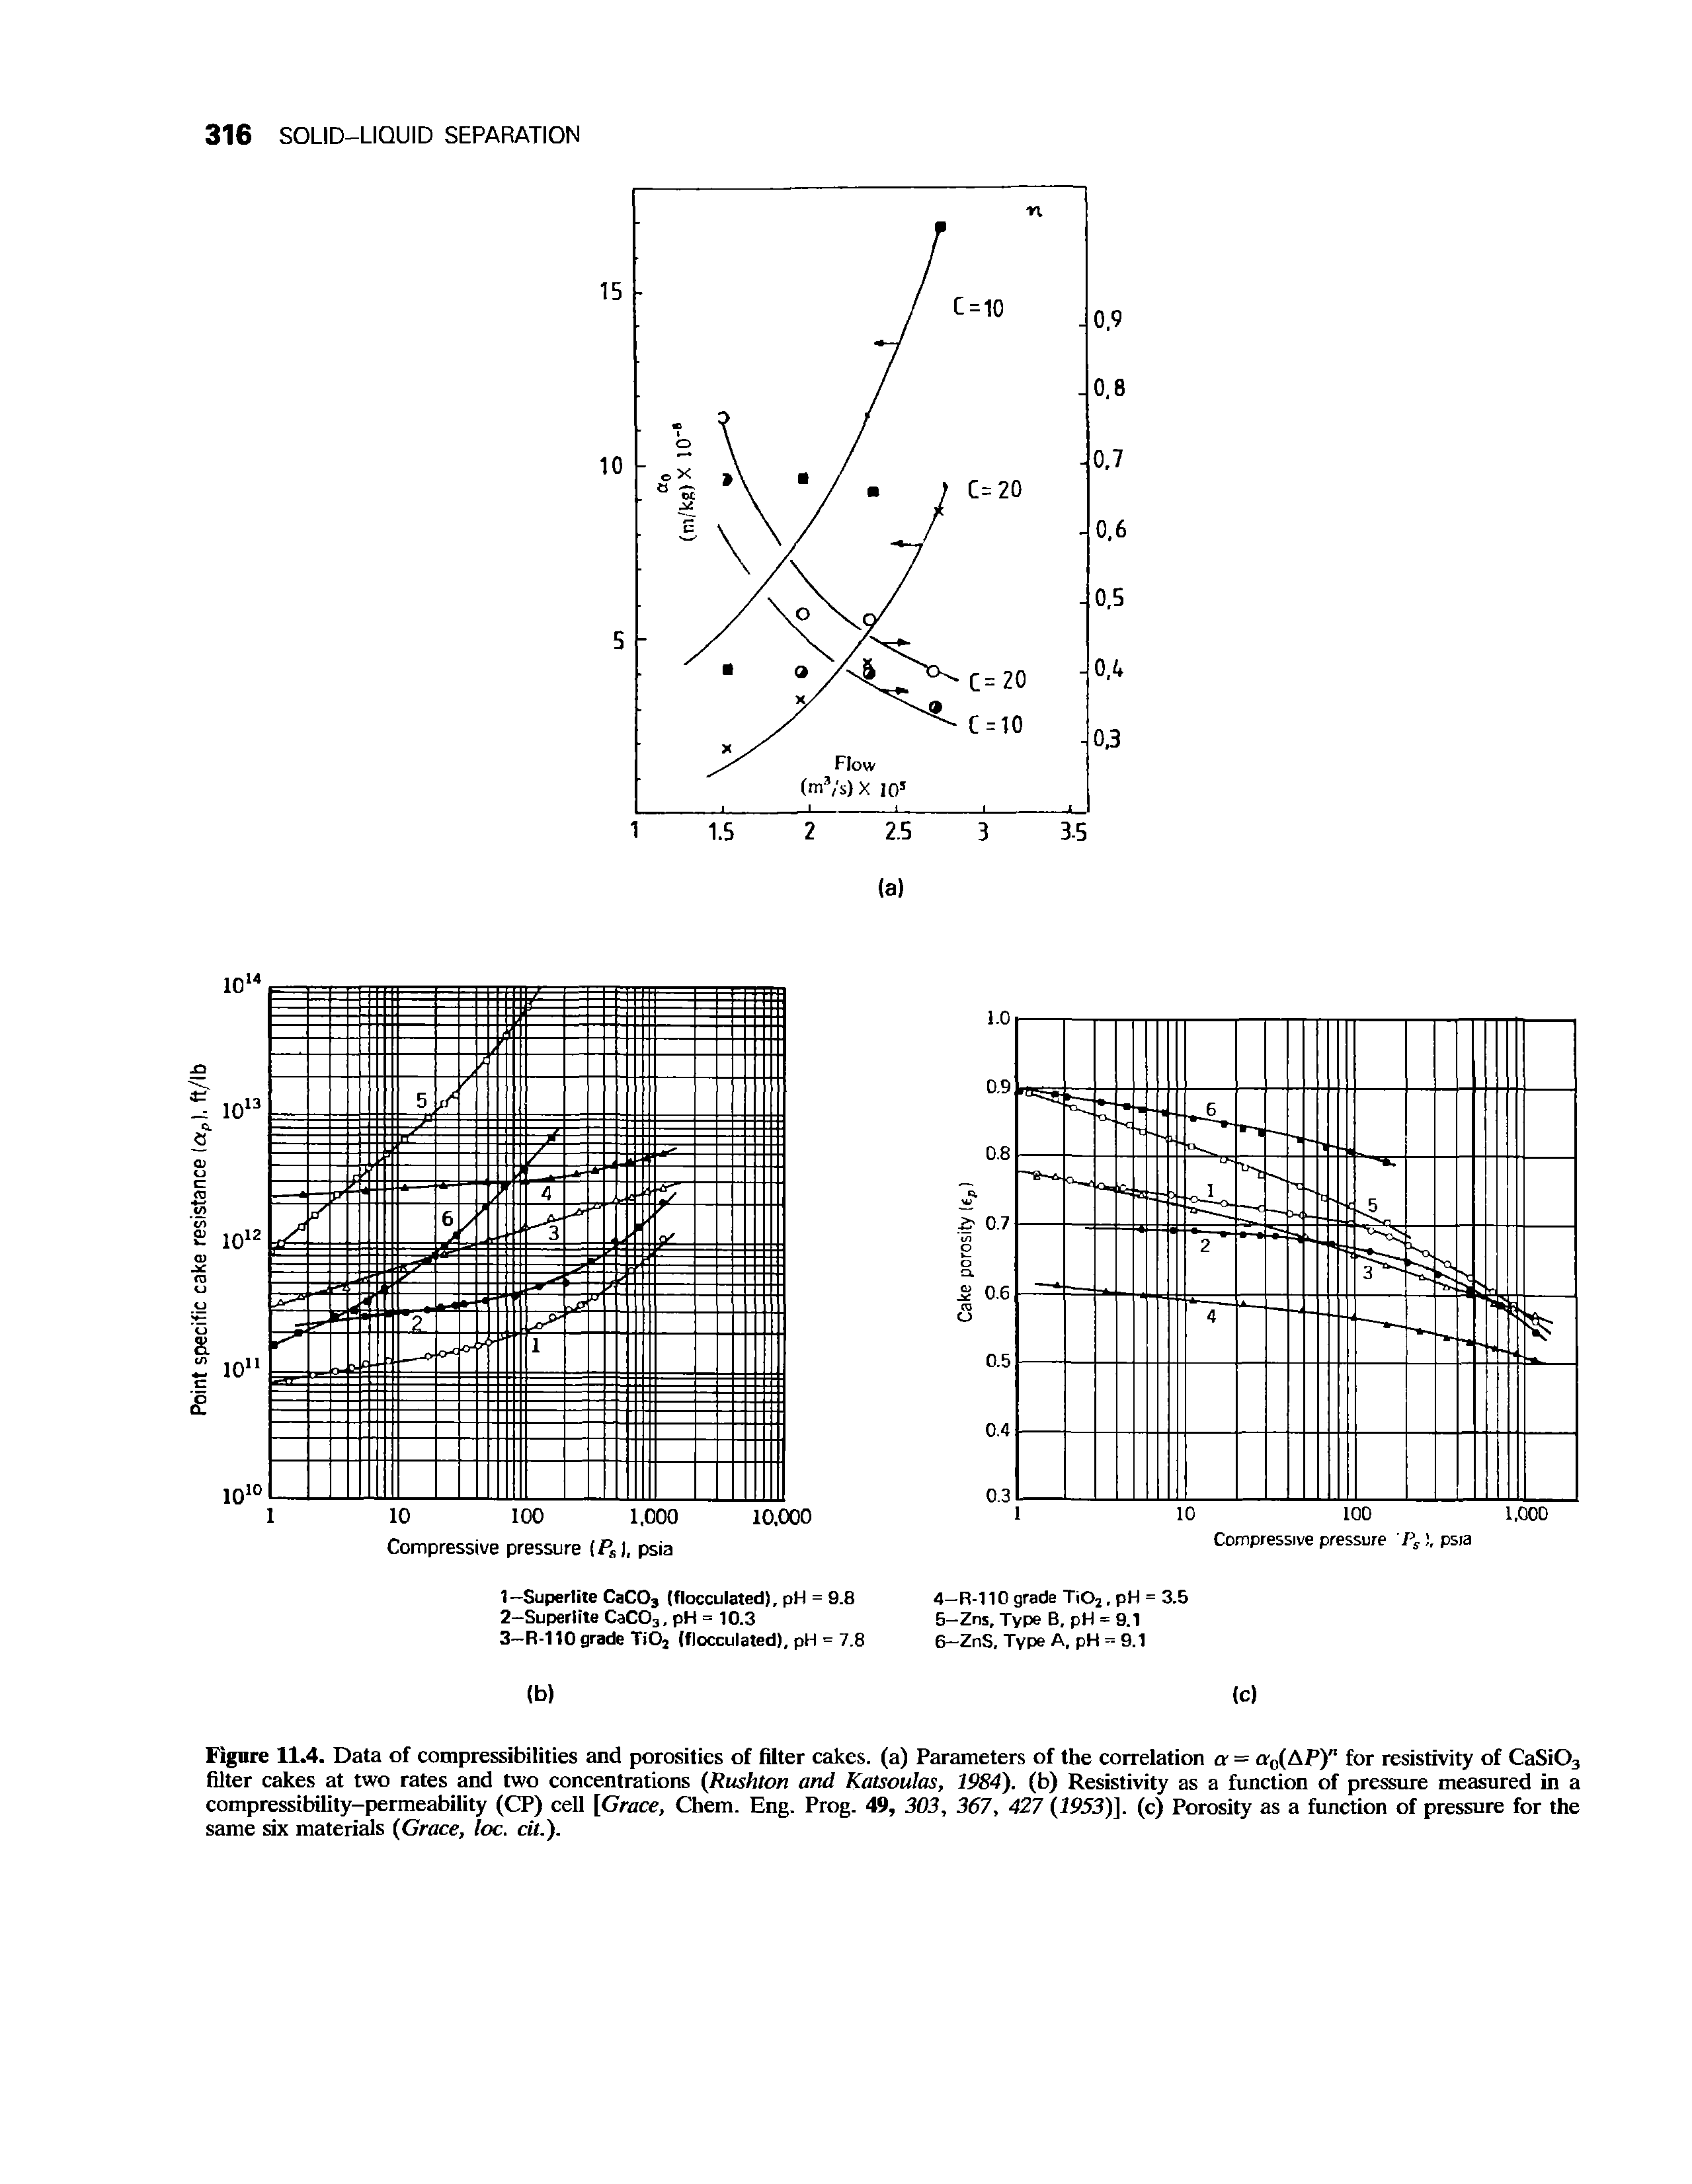 Figure 11.4. Data of compressibilities and porosities of filter cakes, (a) Parameters of the correlation a = a0(hP)n for resistivity of CaSi03 filter cakes at two rates and two concentrations (Rushton and Katsoulas, 1984). (b) Resistivity as a function of pressure measured in a compressibility-permeability (CP) cell [Grace, Chem. Eng. Prog. 49, 303, 367, 427 (1953)]. (c) Porosity as a function of pressure for the same six materials (Grace, loc. tit.).